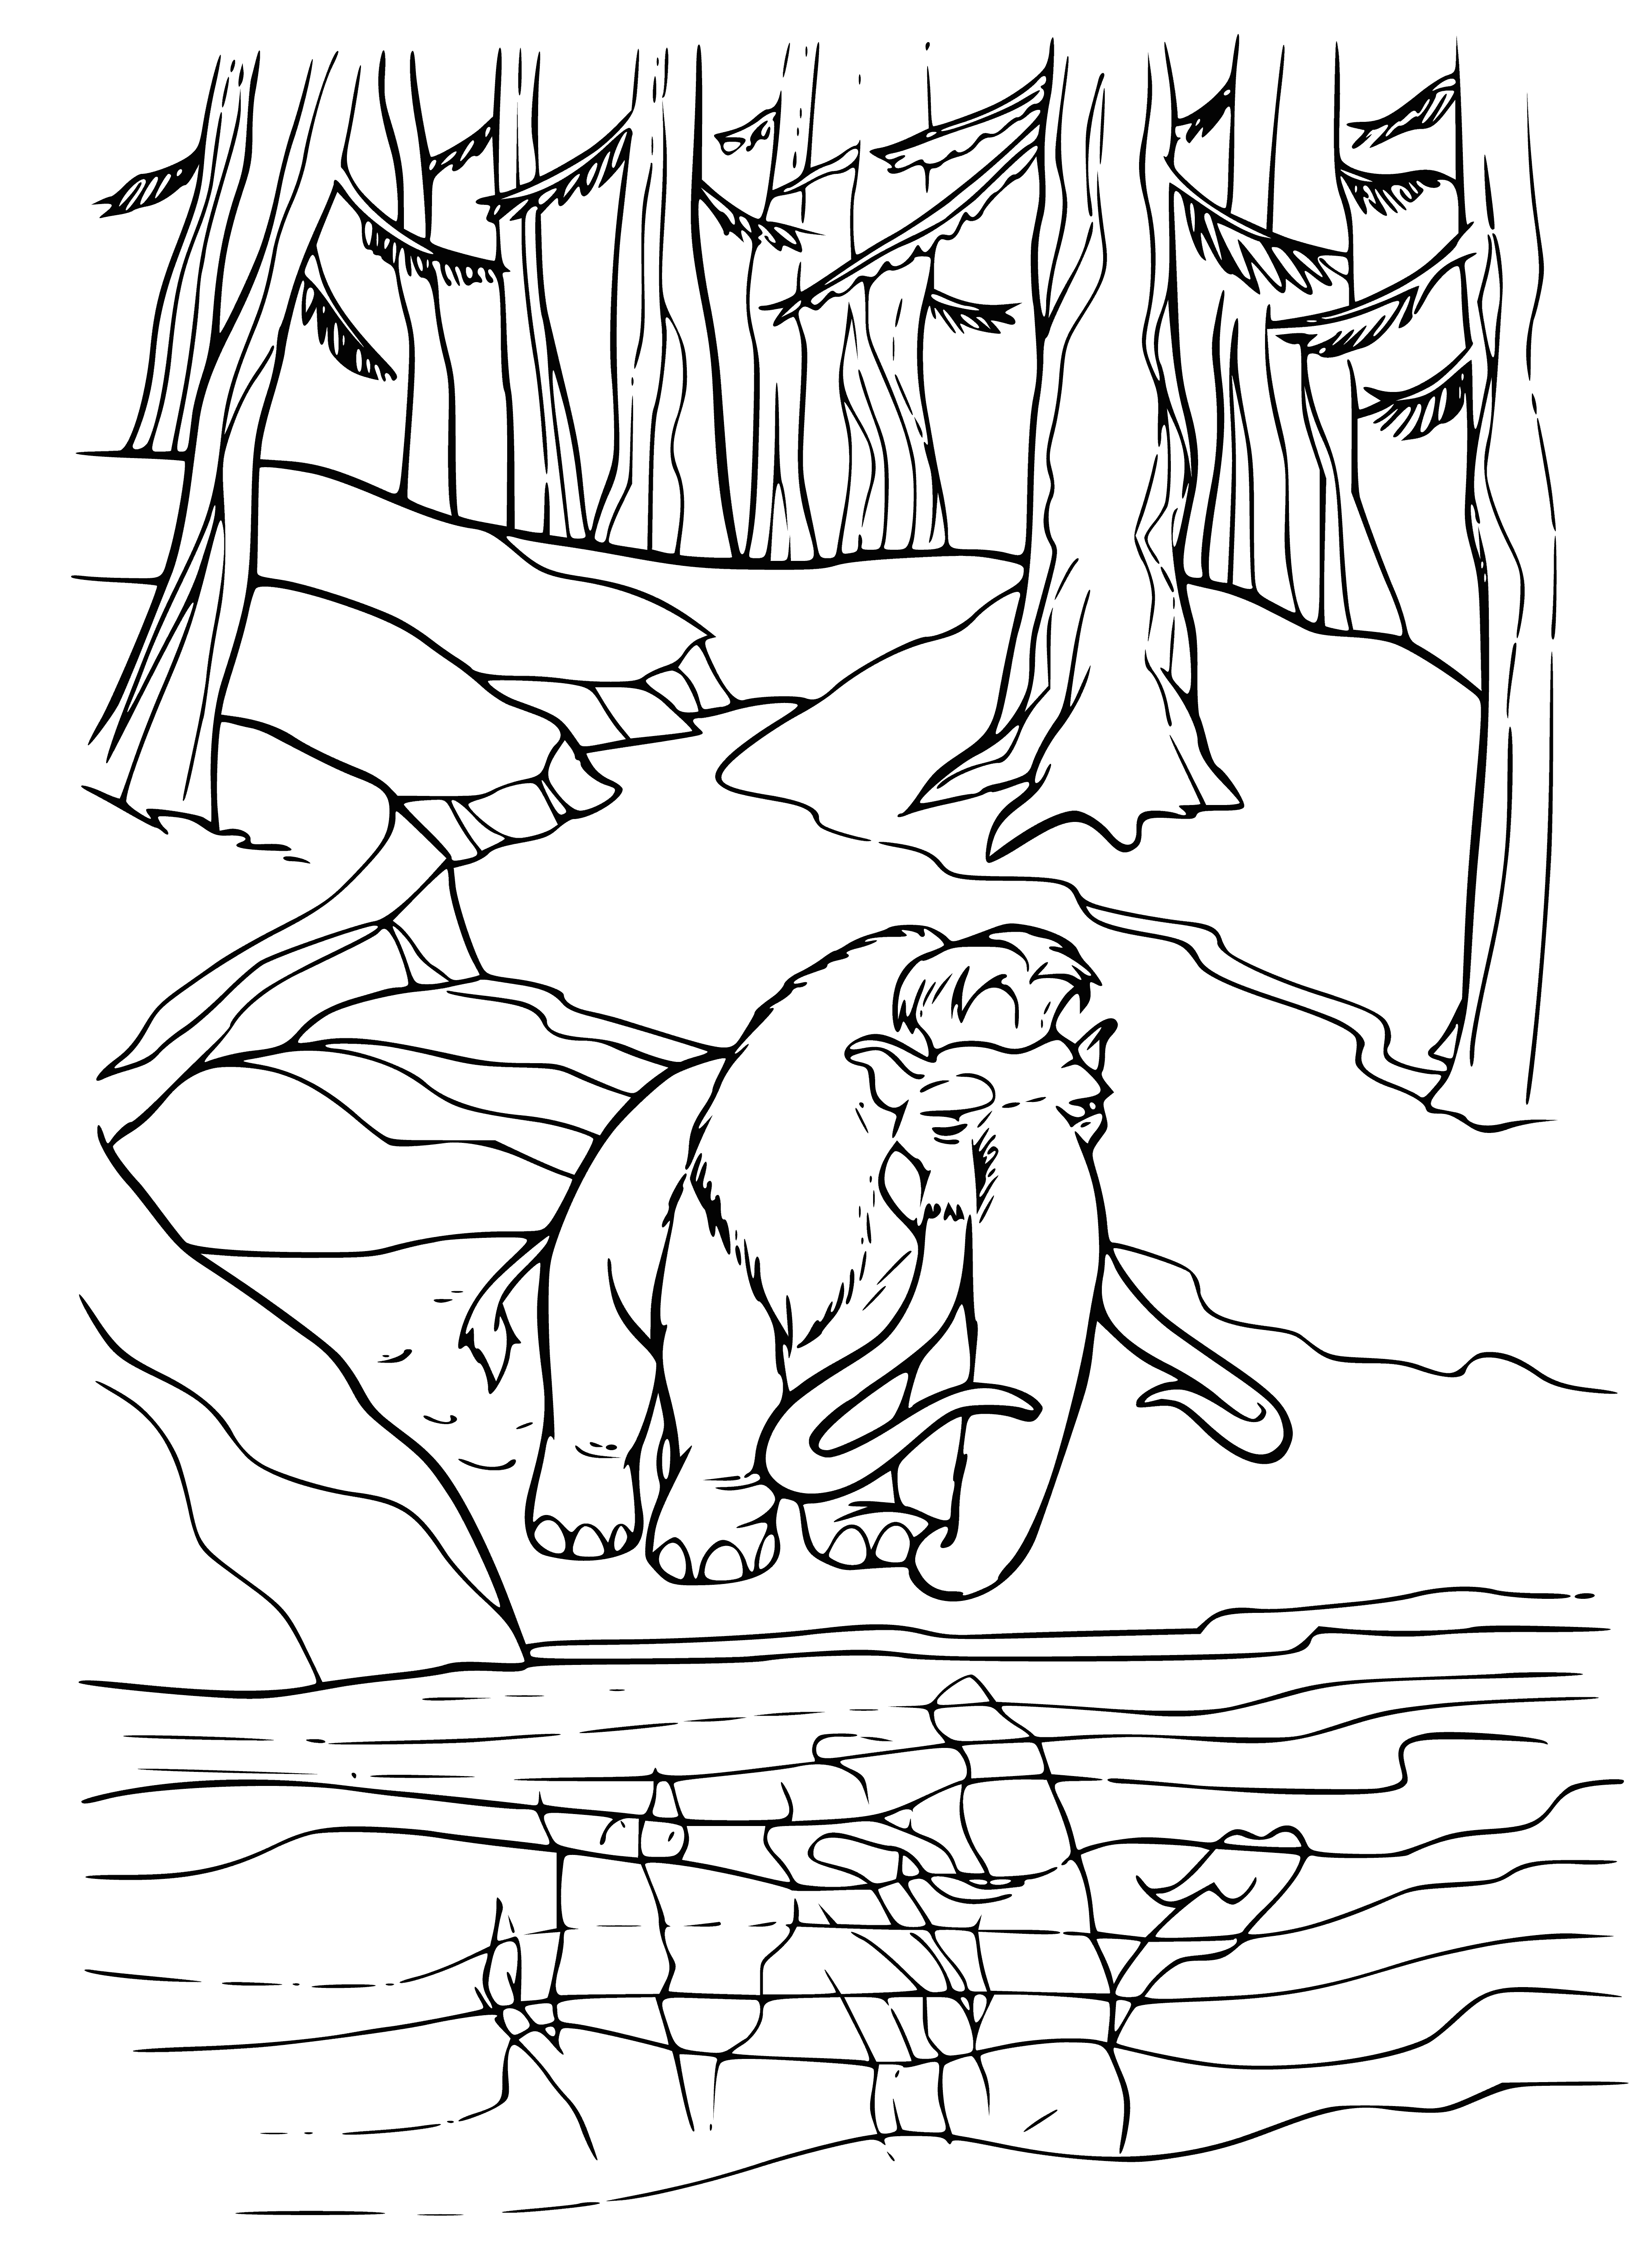 Manny the mammoth is very lonely coloring page